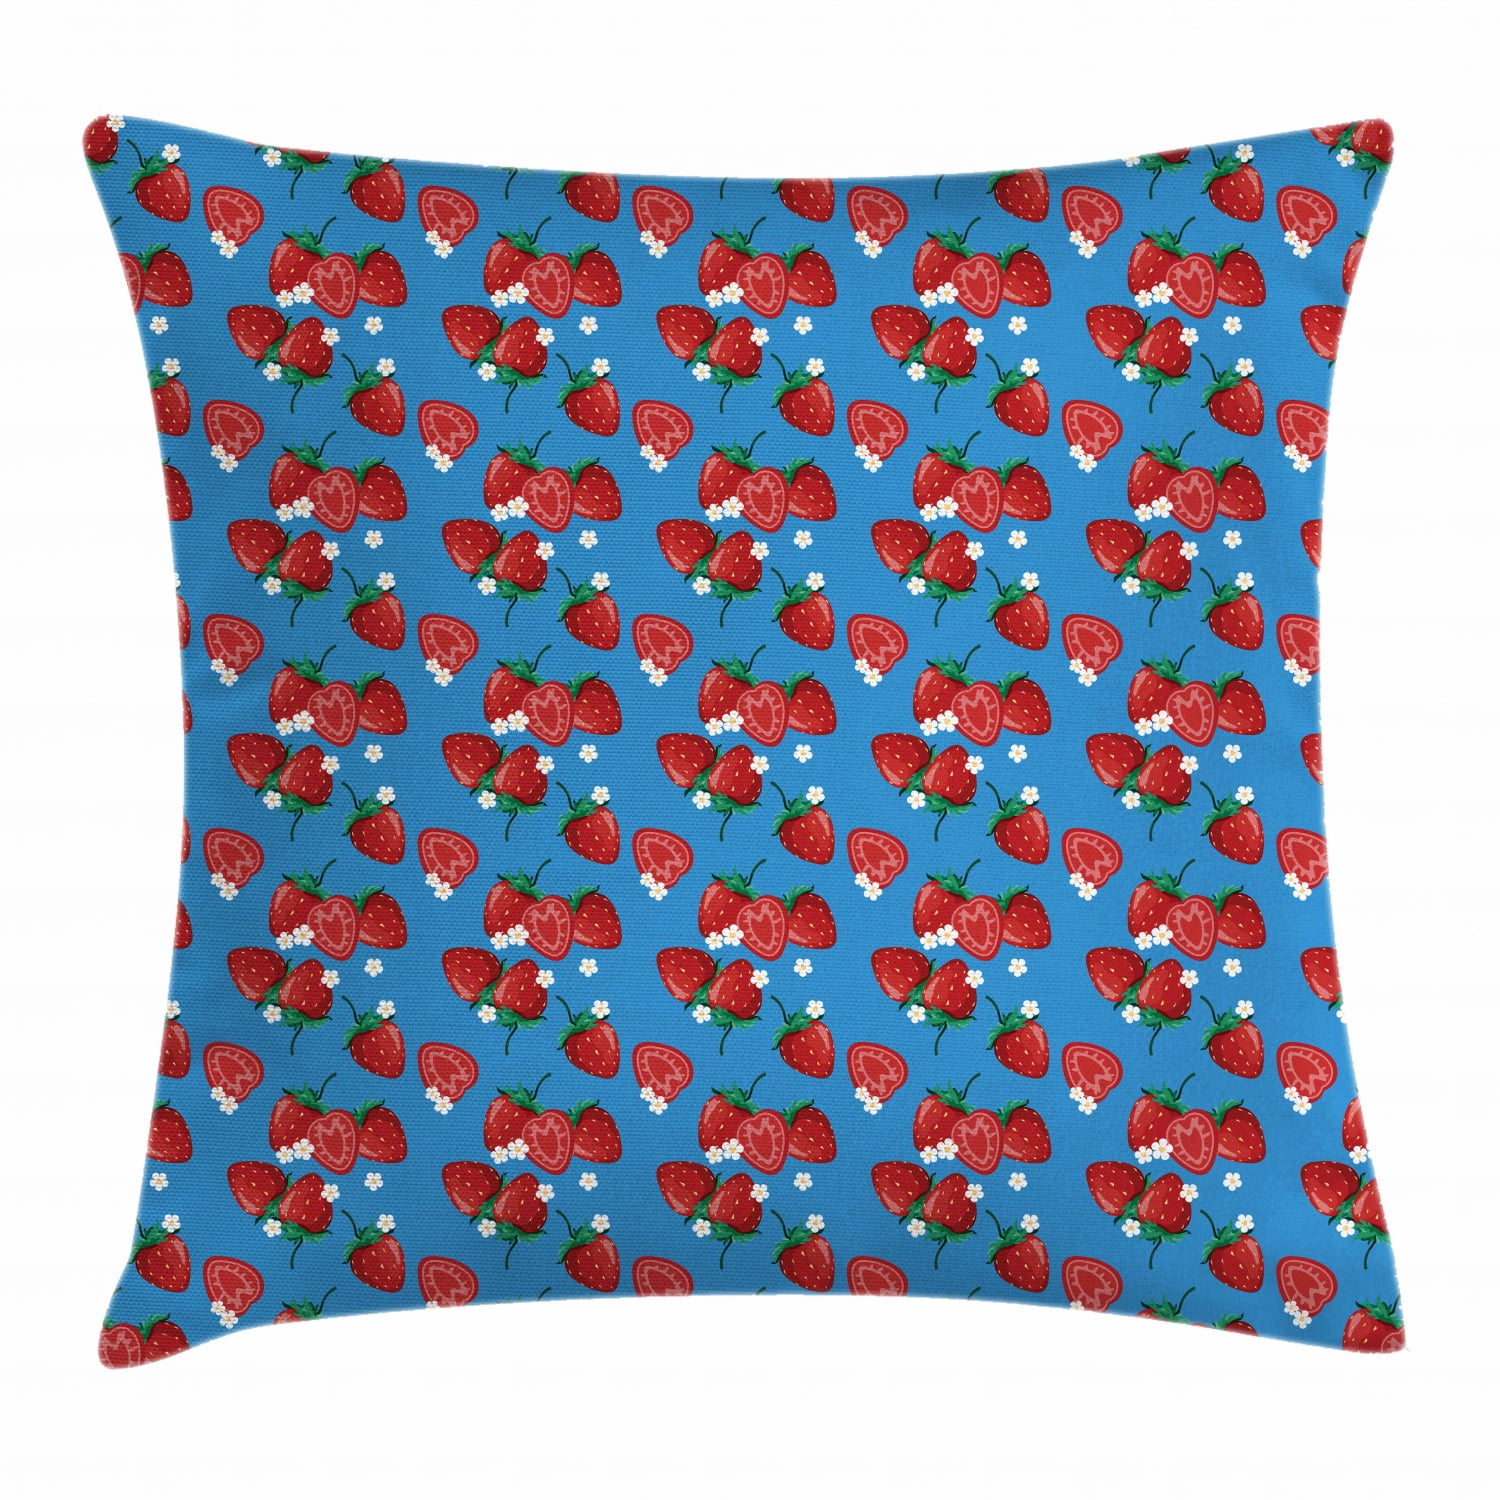 16x16 Big Red Strawberry Fruit Strawberries Throw Pillow Multicolor